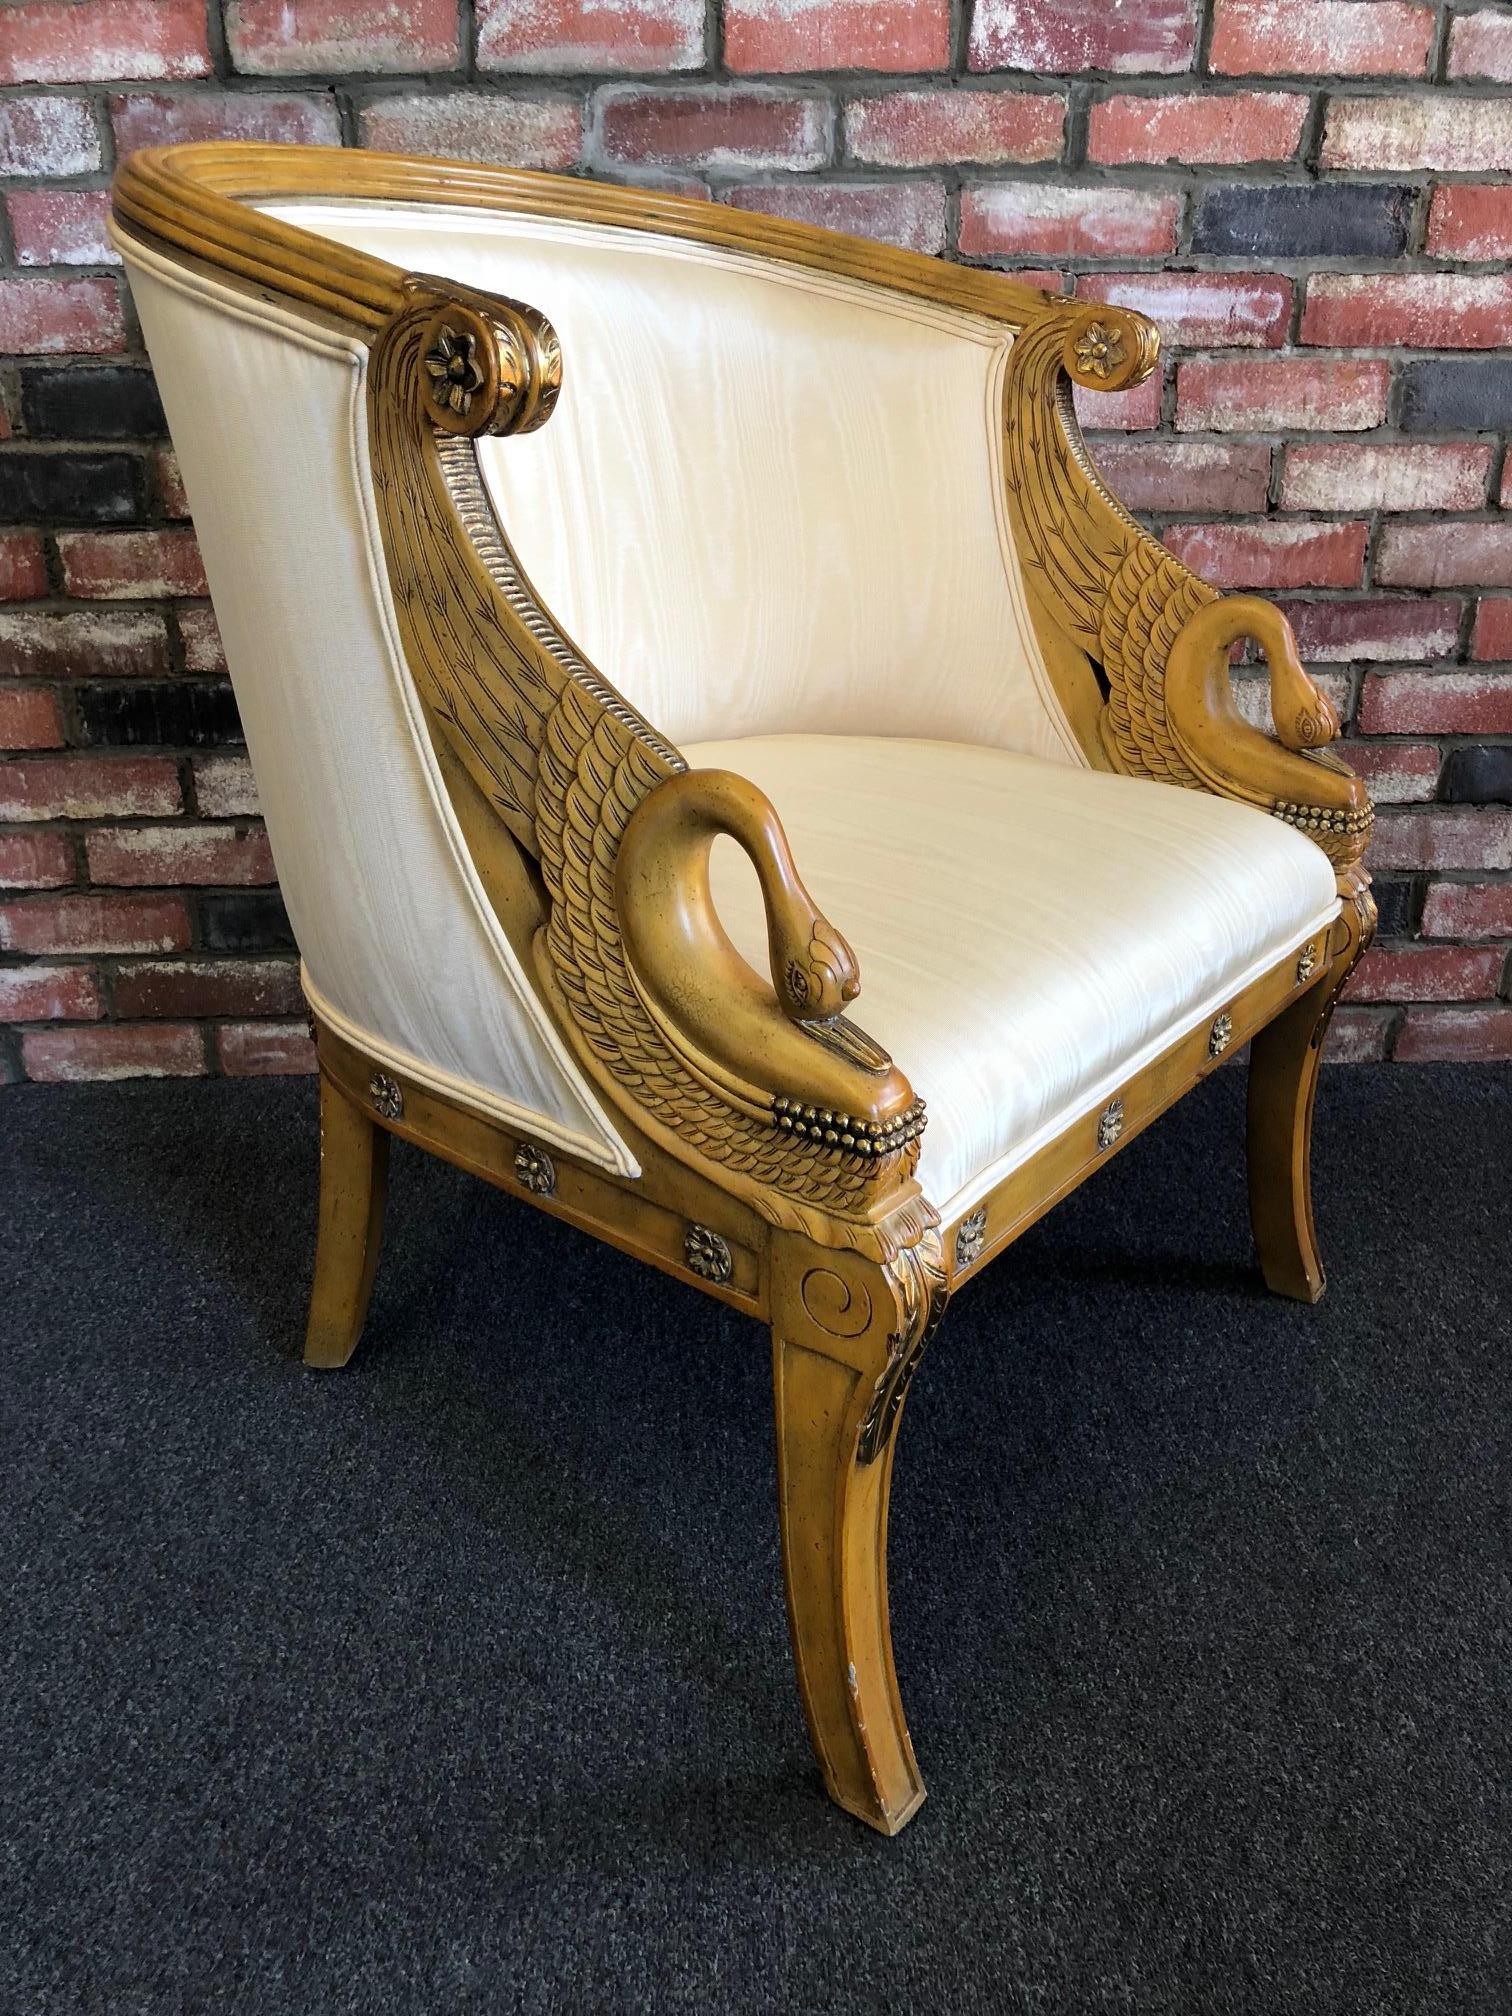 A pair of hand-carved mahogany empire armchair with gold metallic leaf swan accents and light yellow moire silk fabric by Maitland-Smith, circa 1980. 

Measures: Arm height is 30.5